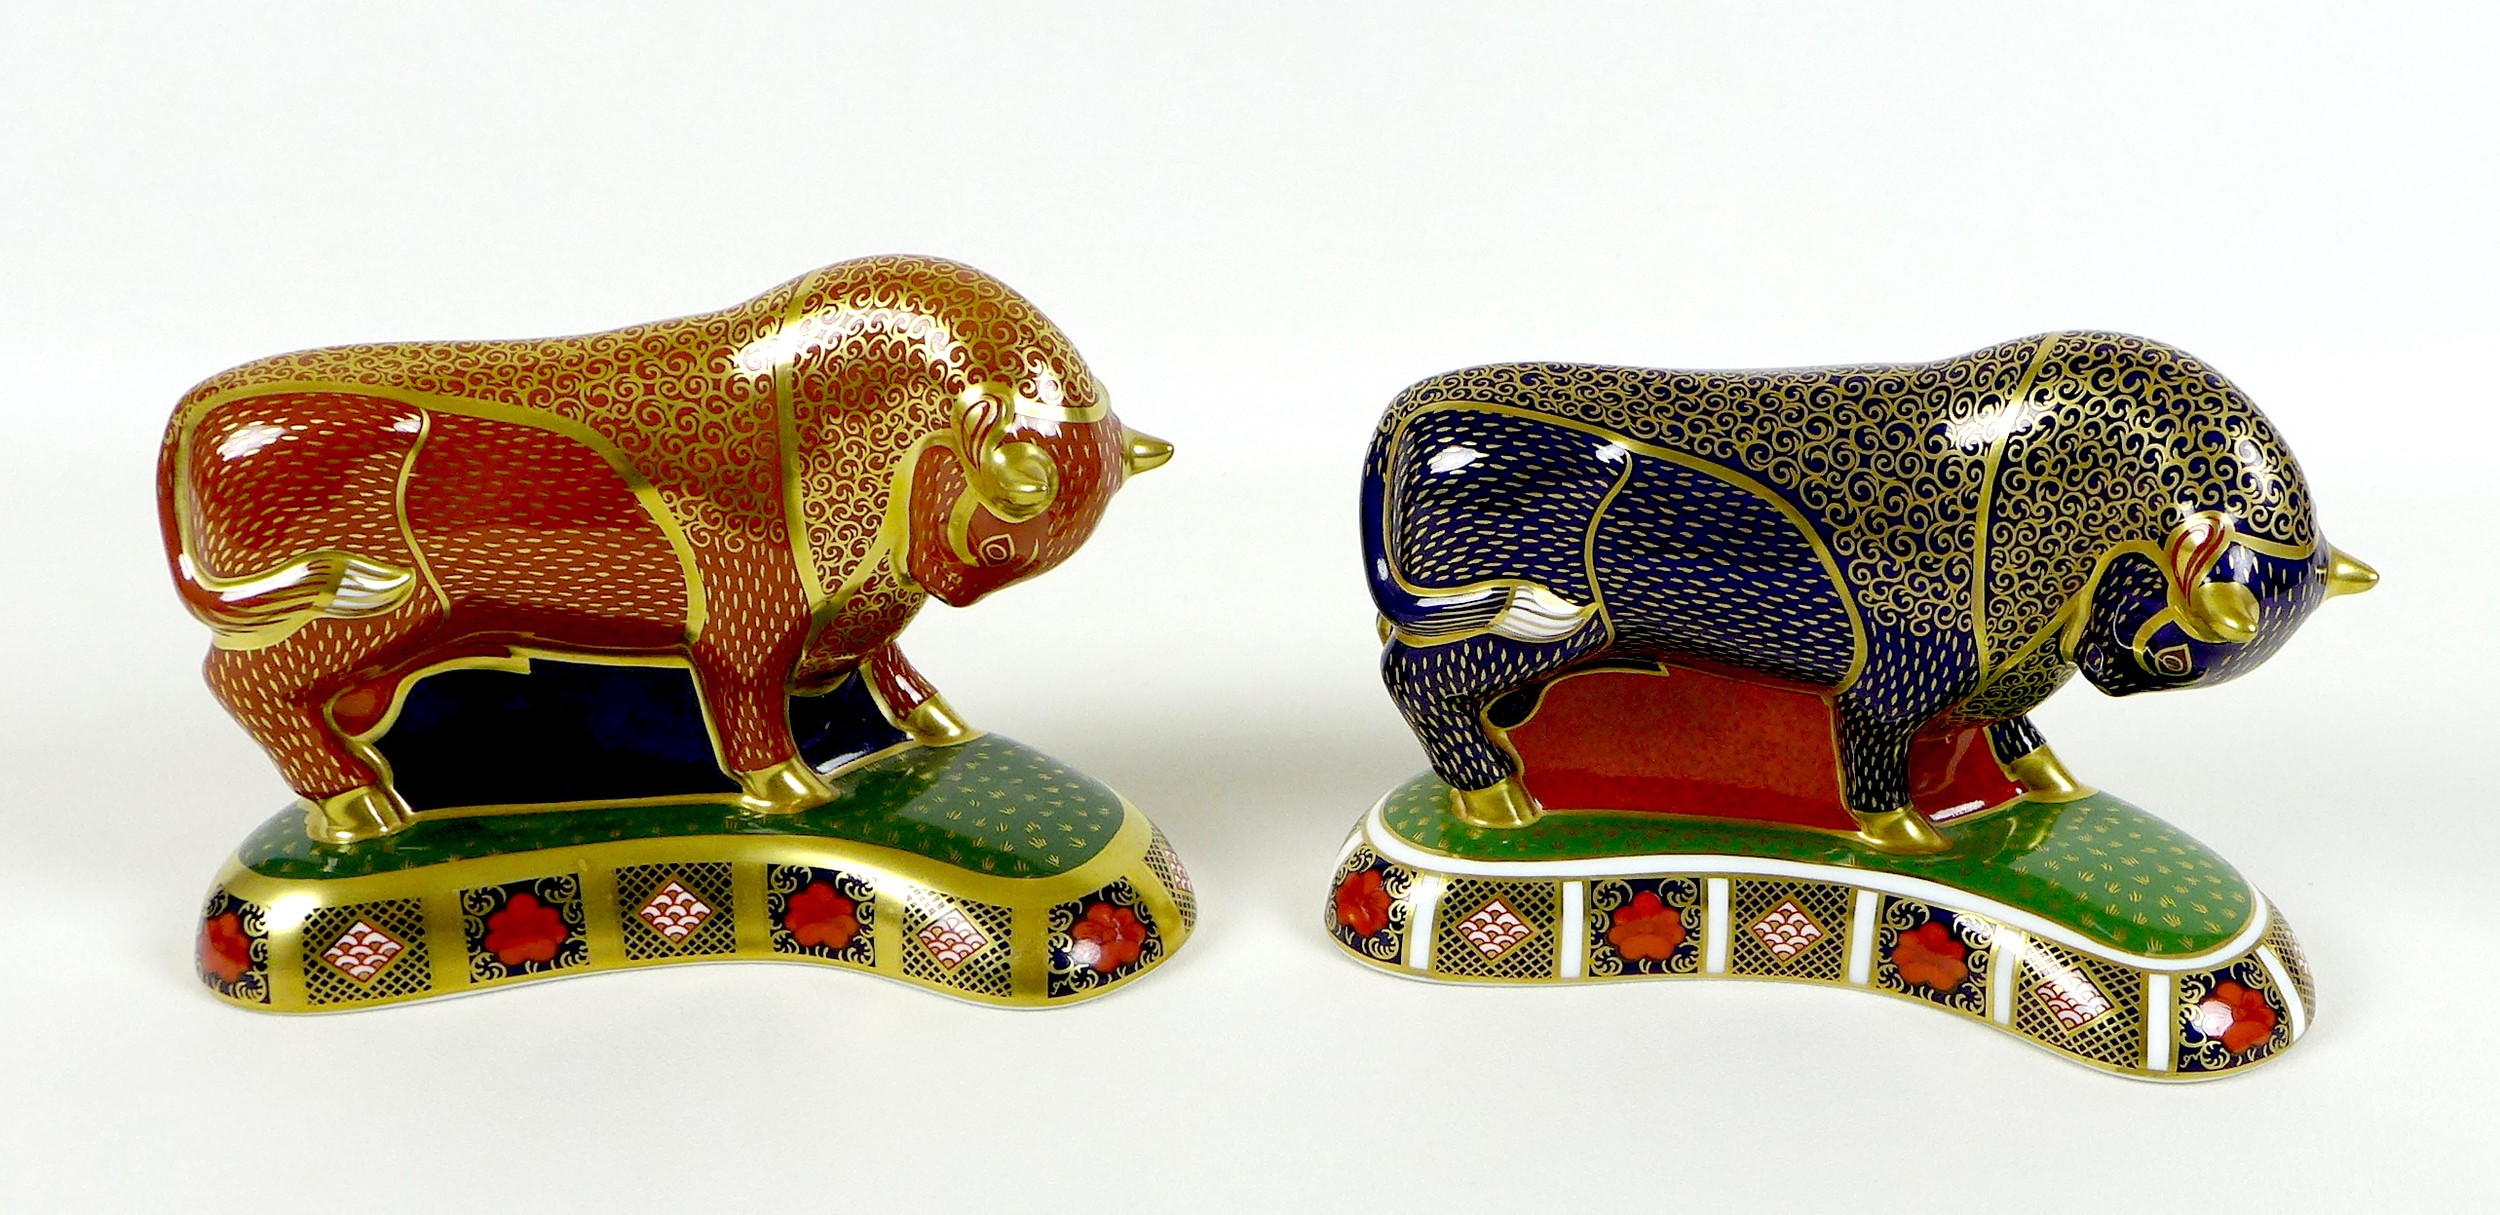 Two Royal Crown Derby paperweights, modelled as 'Harrods Bull', one of a limited edition of 400